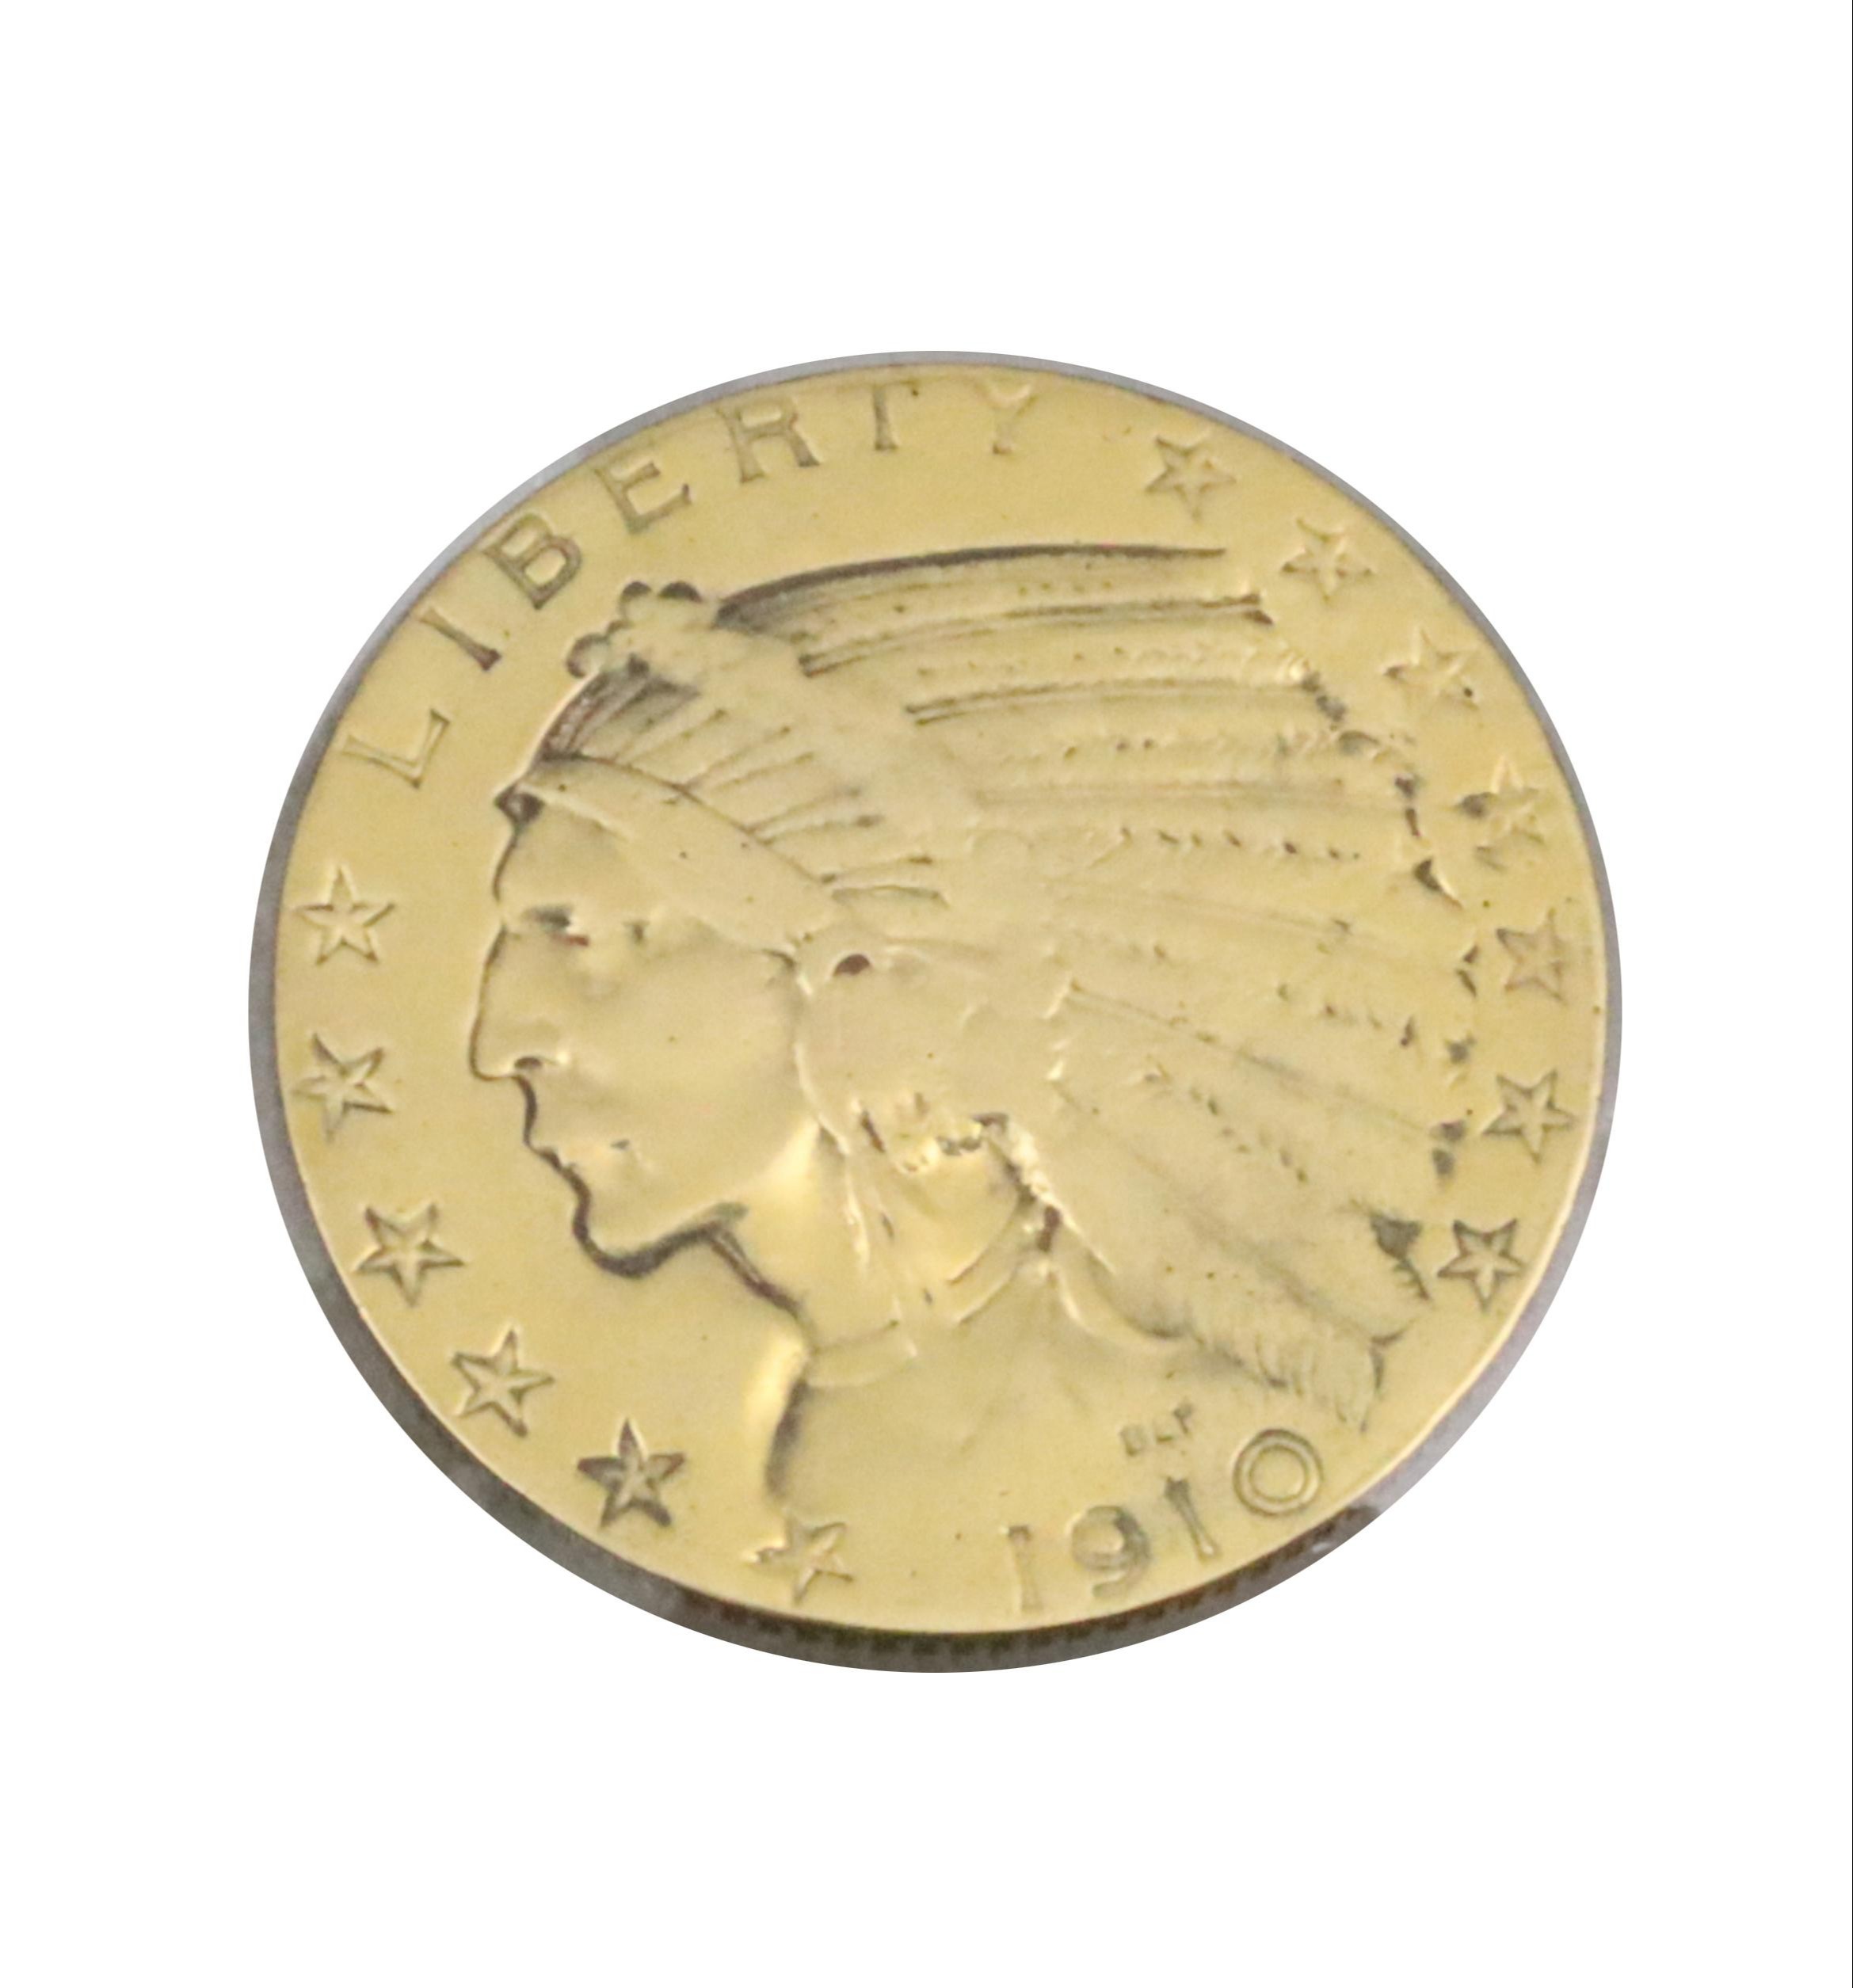 1910 F12 $5 INDIAN HEAD GOLD COIN